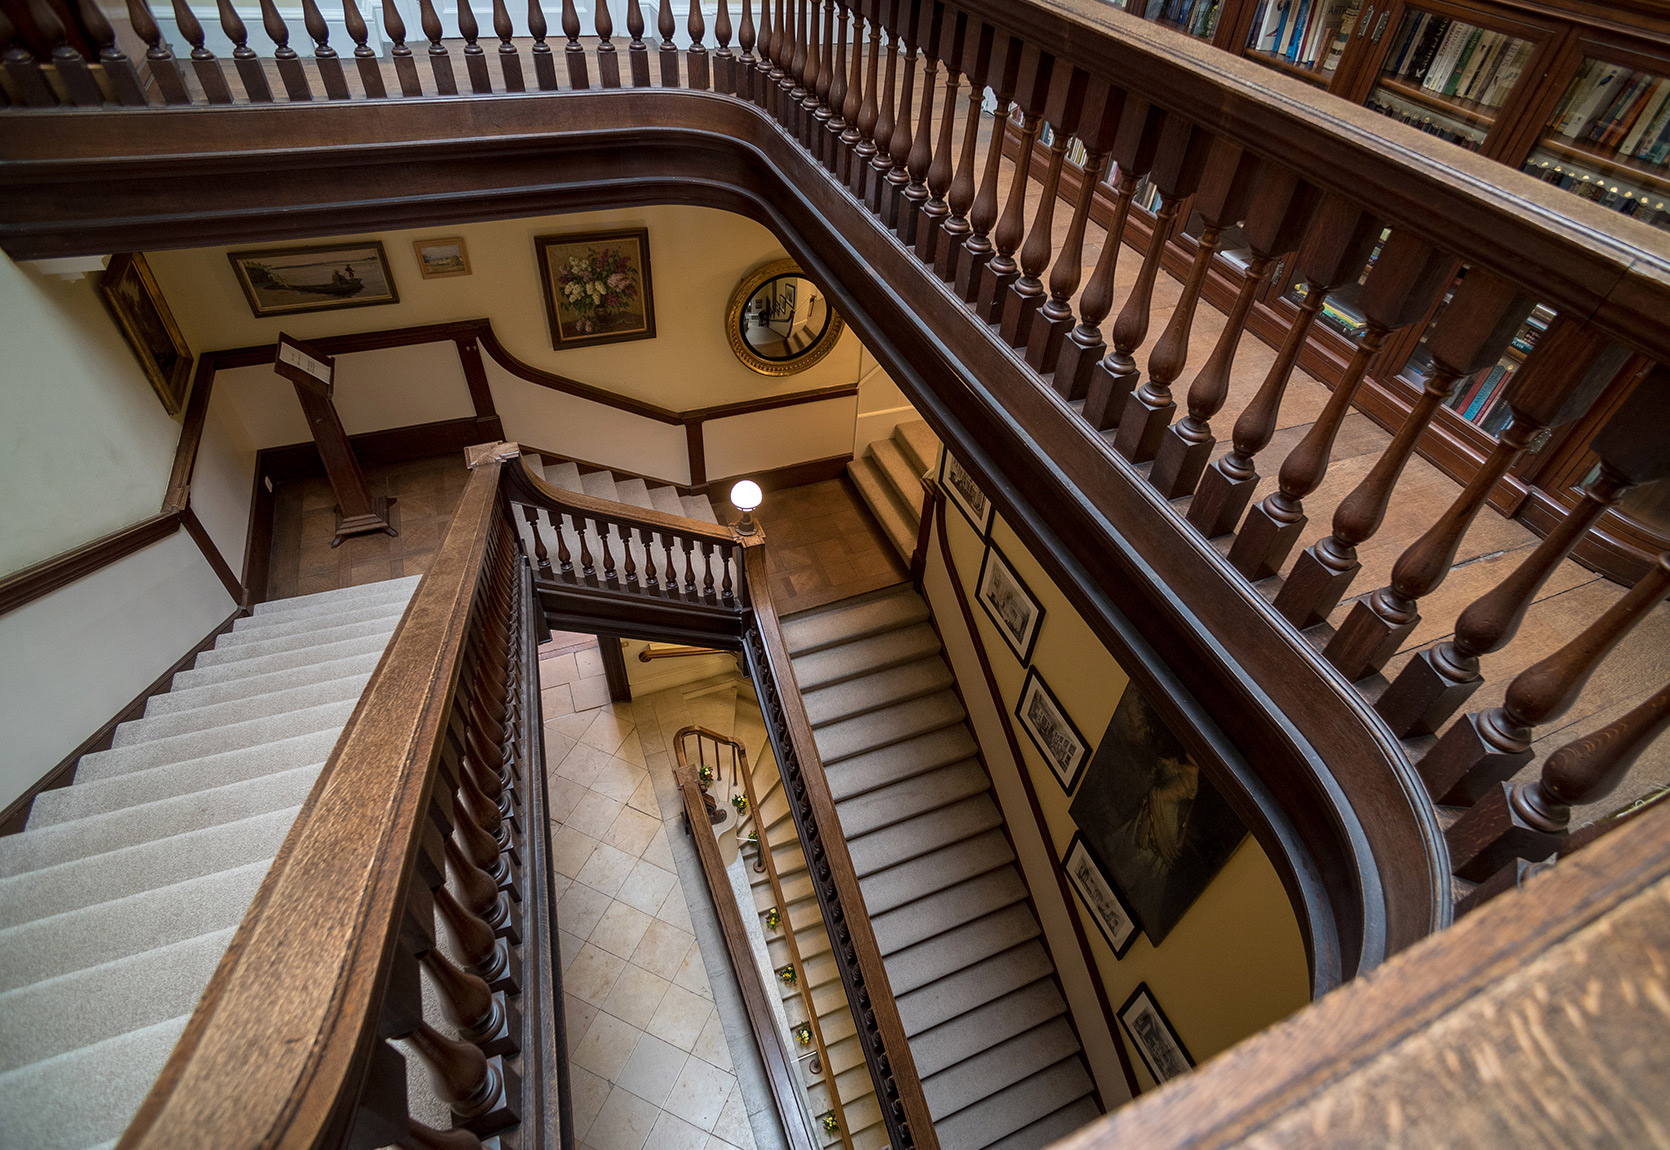 The West Staircase at Kirtlington Park